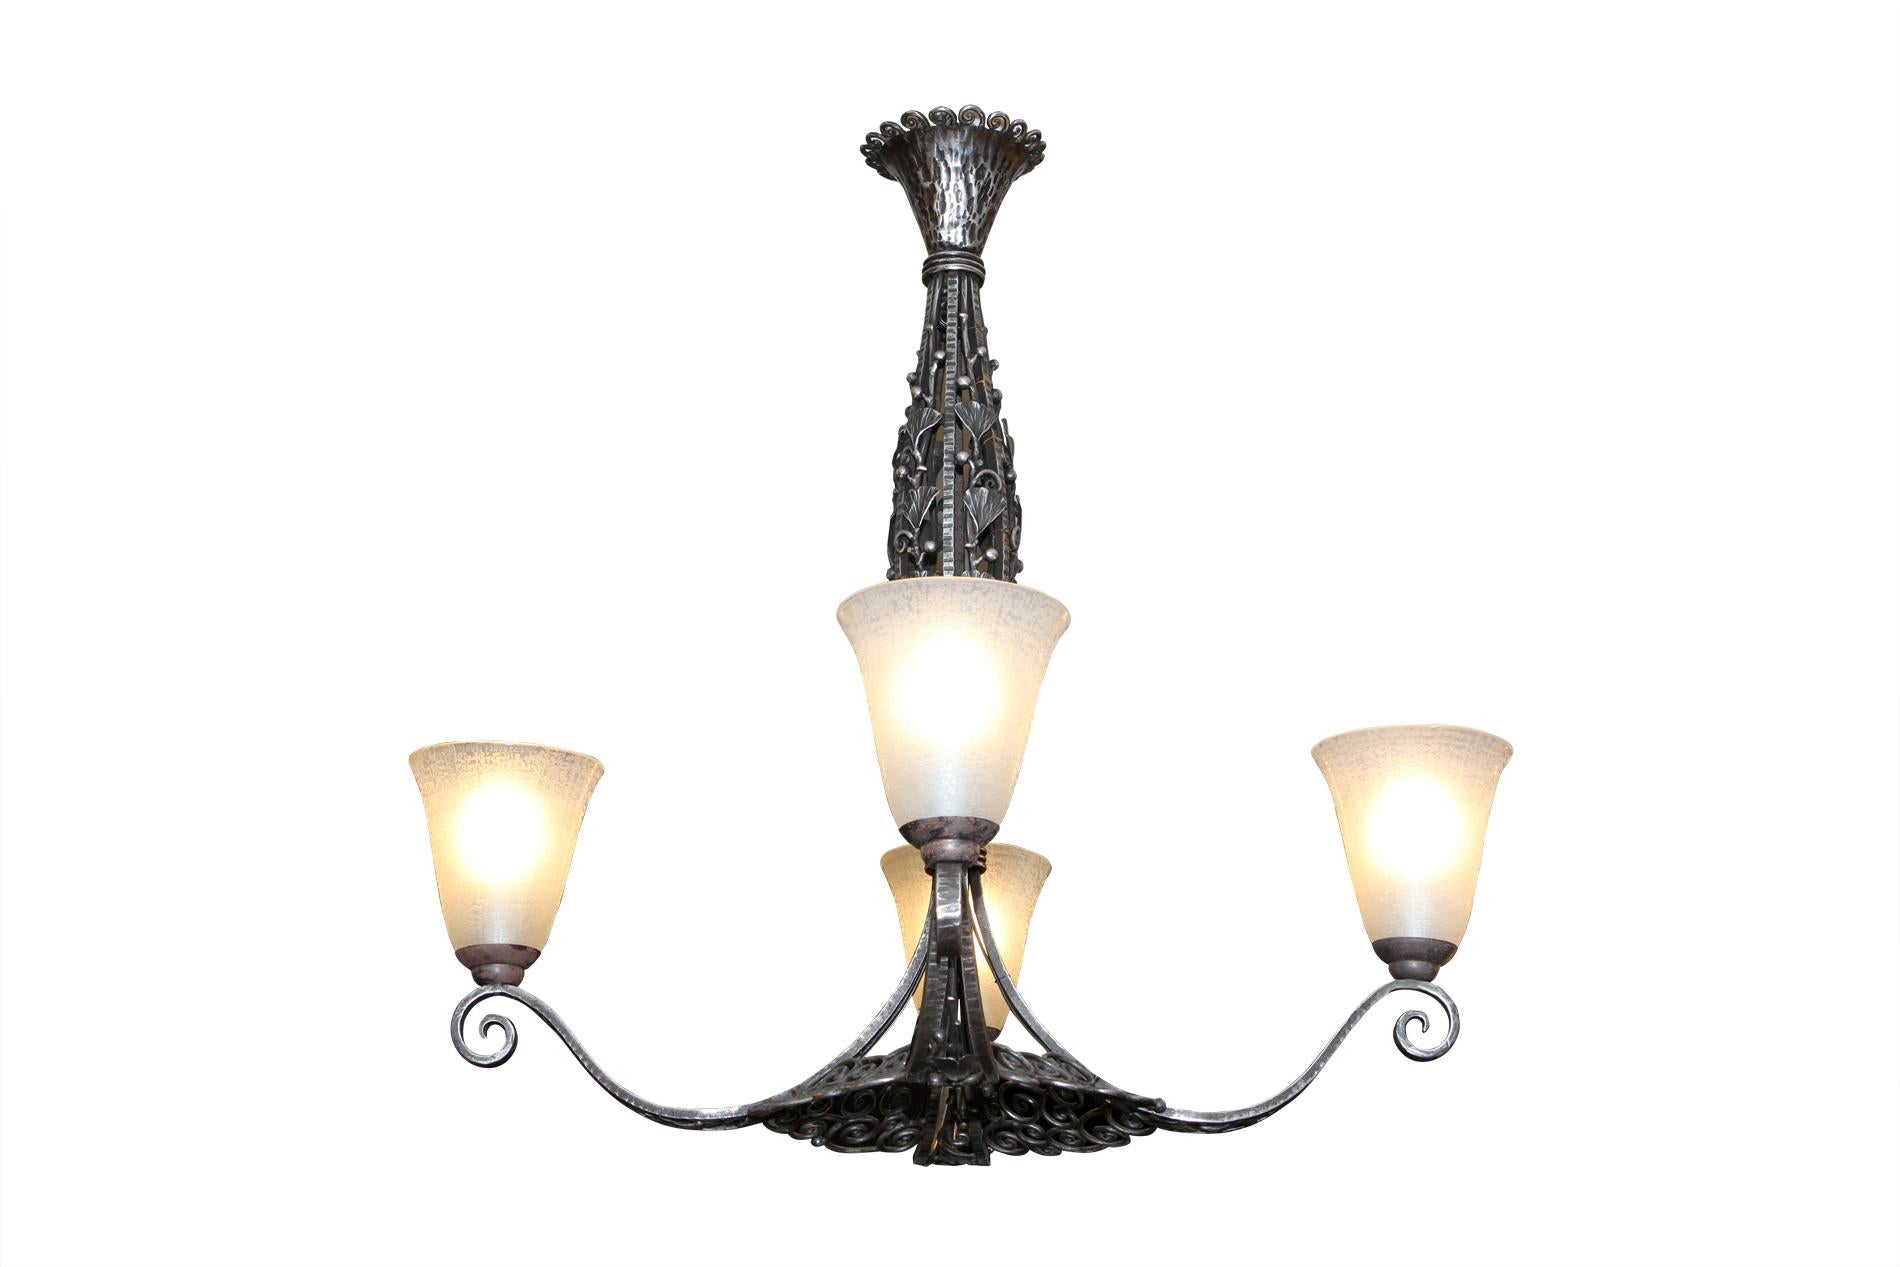 Original french art deco chandelier in wrought iron by Edgar Brandt with Daum tulip-shaped frosted glass. Iconic and emblematic model from the collaboration between Brandt's creations and Daum glass manufactory. 